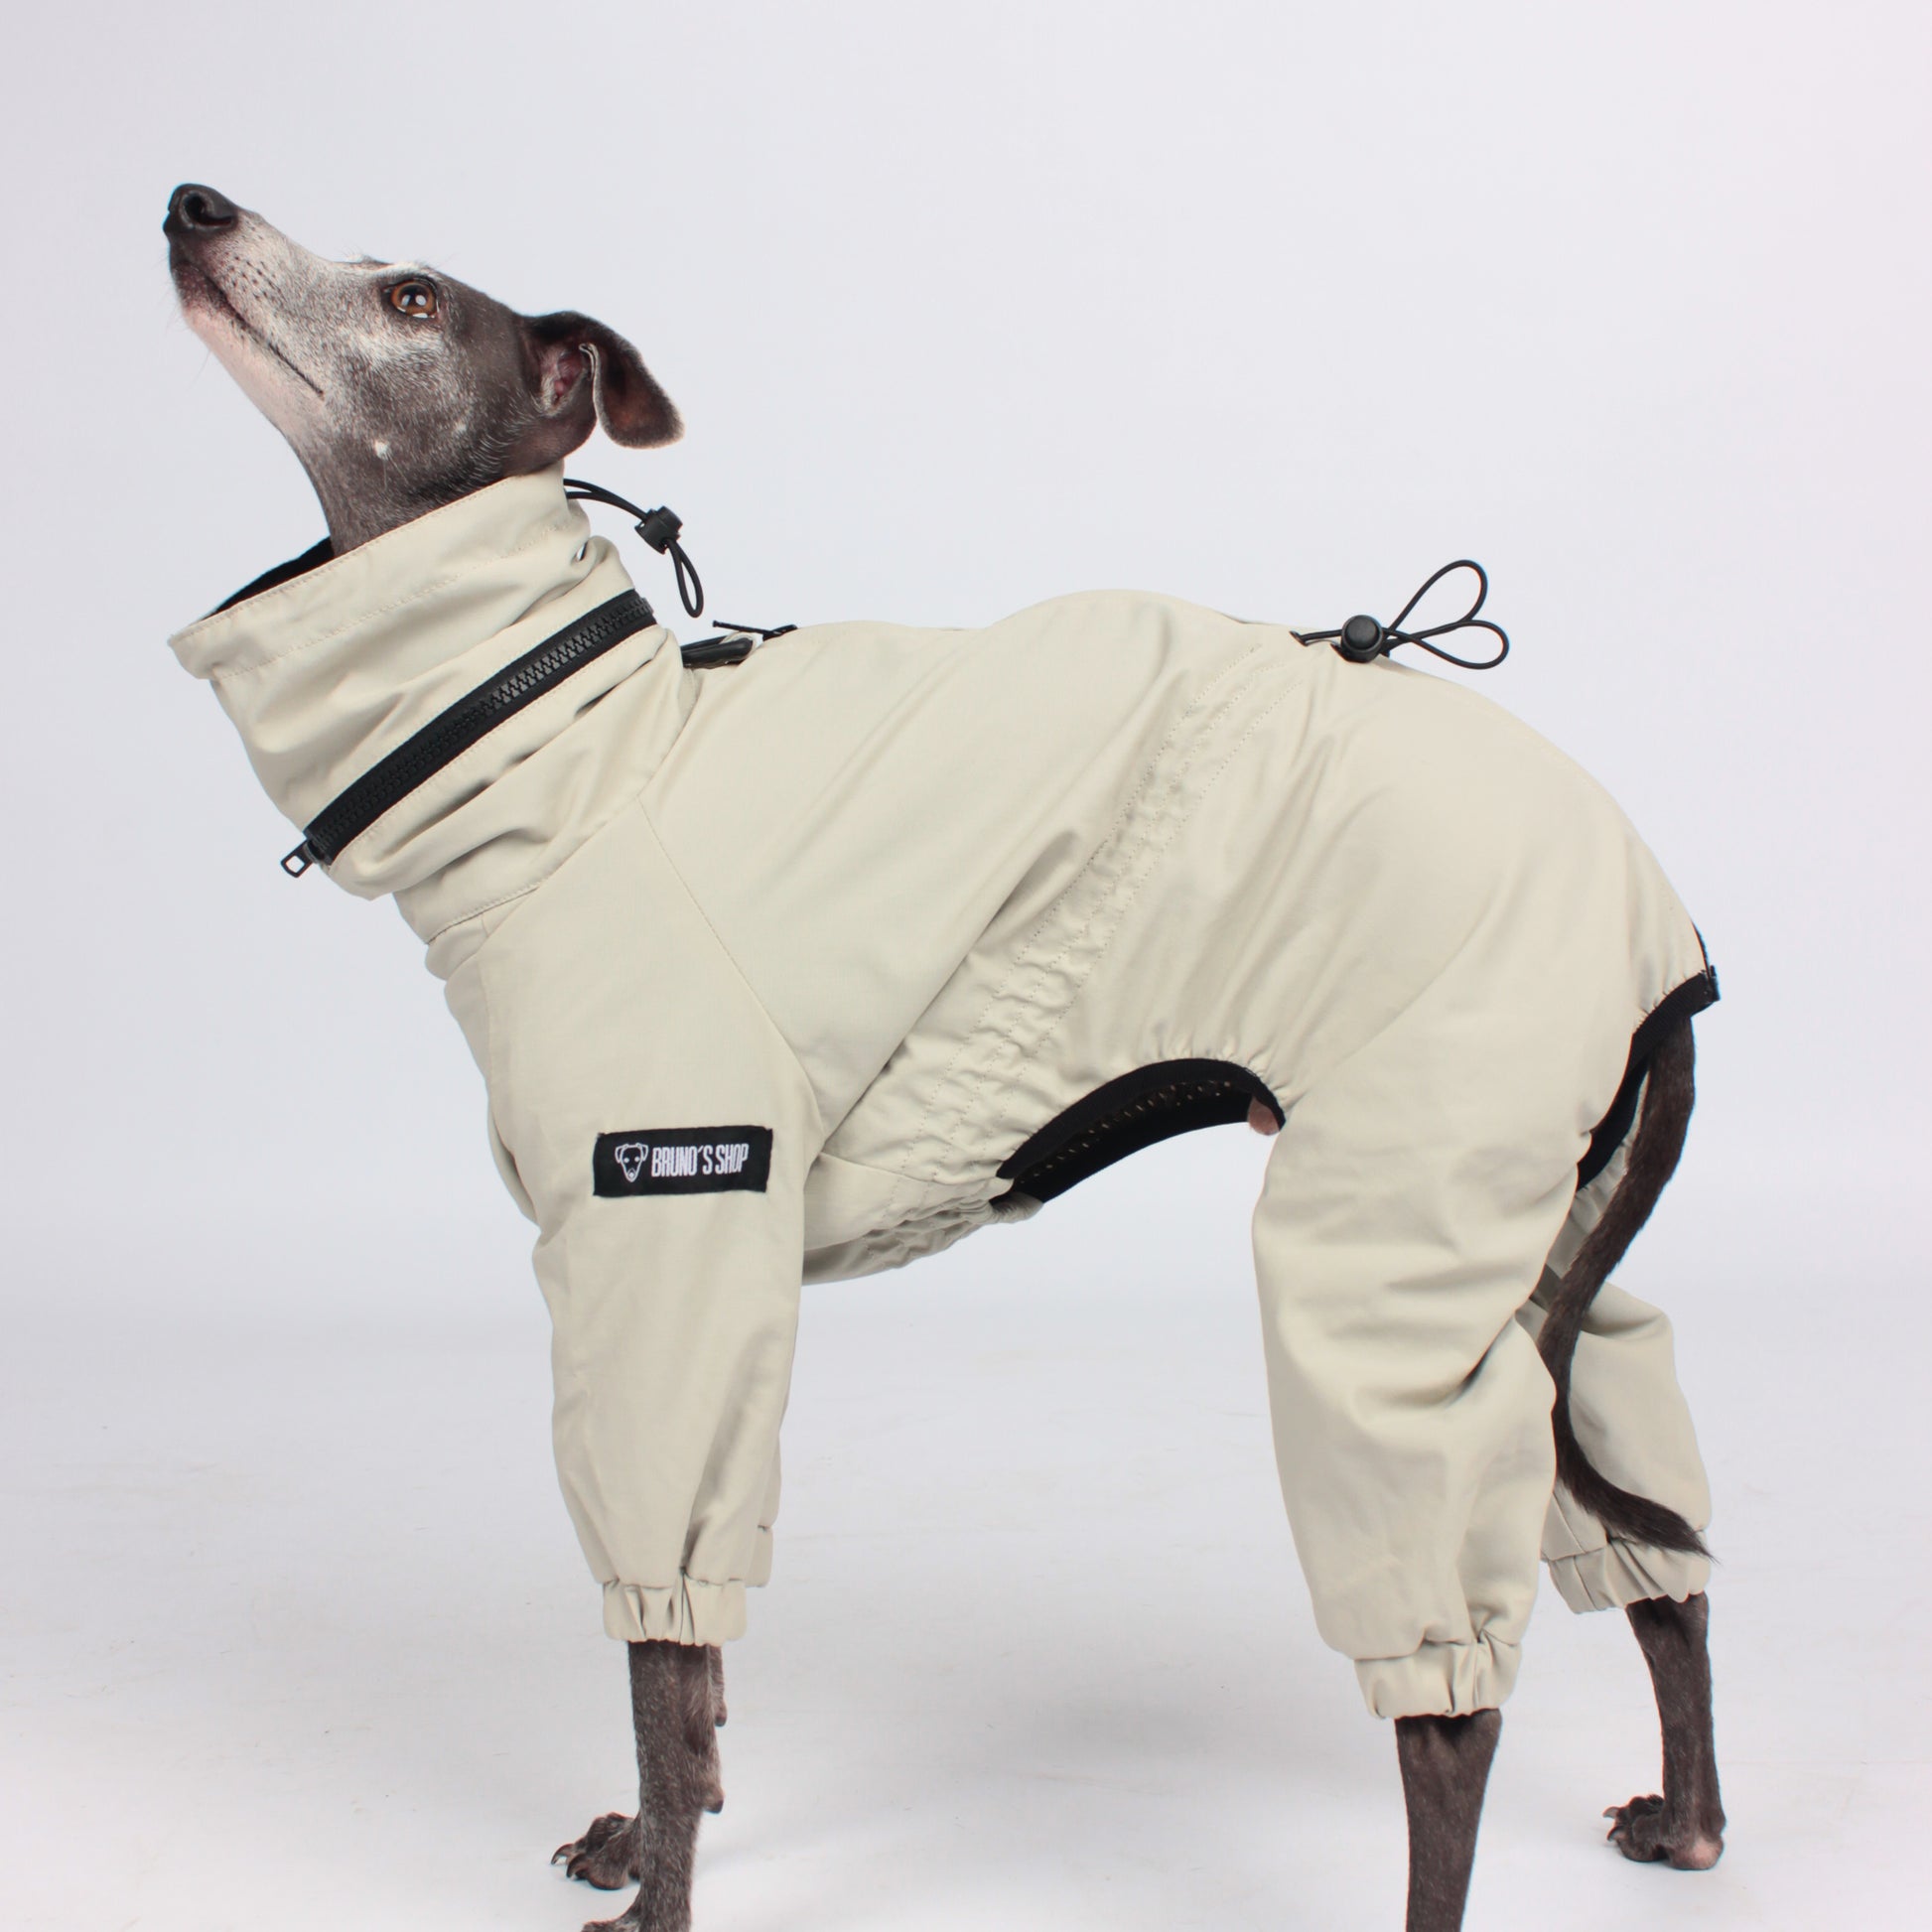 Luxury Italian Greyhound/Whippet clothing, windbreaker, winter coat, water and dirty repellent.